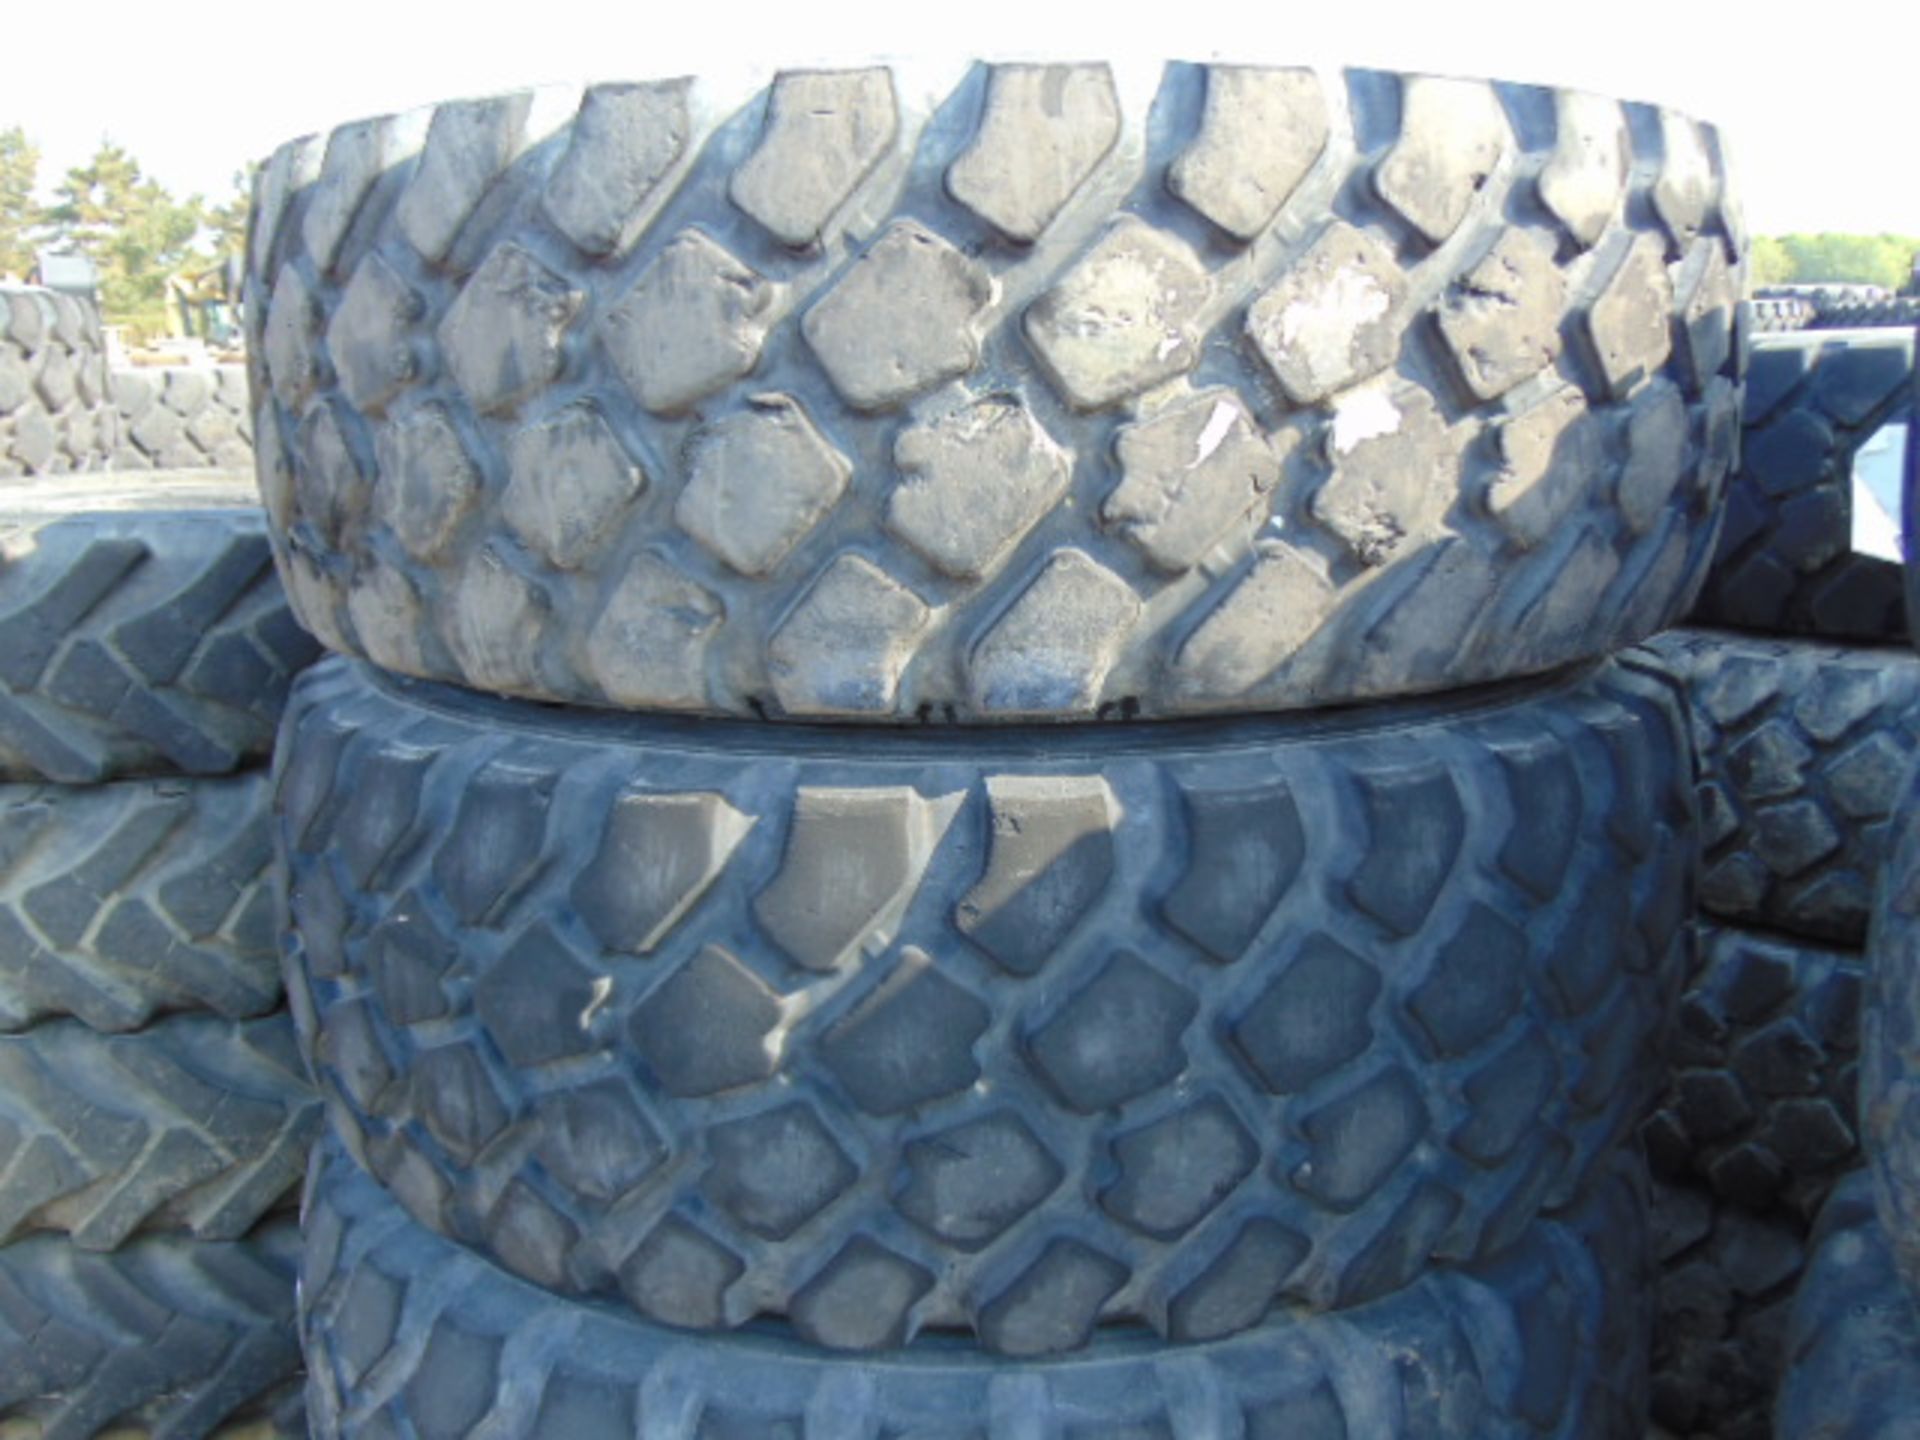 4 x Michelin XZL 395/85 R20 Tyres - Image 2 of 6